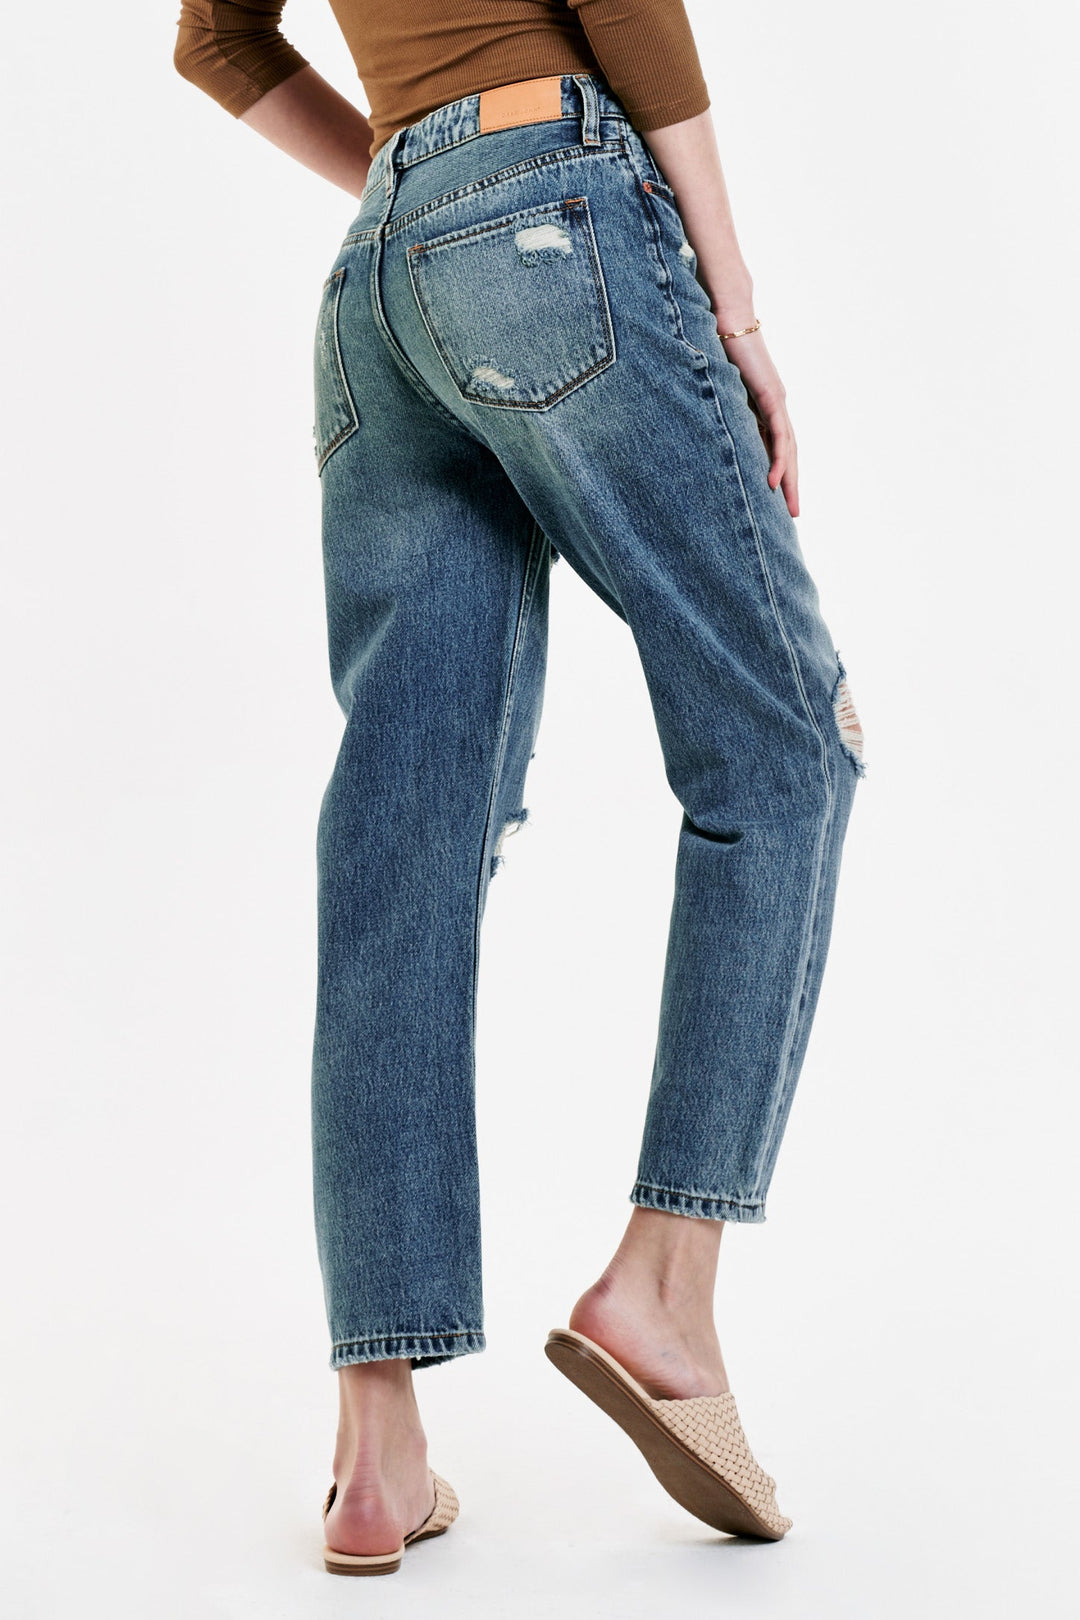 image of a female model wearing a JODI SUPER HIGH RISE CROPPED STRAIGHT JEANS SUMMER SKY JEANS